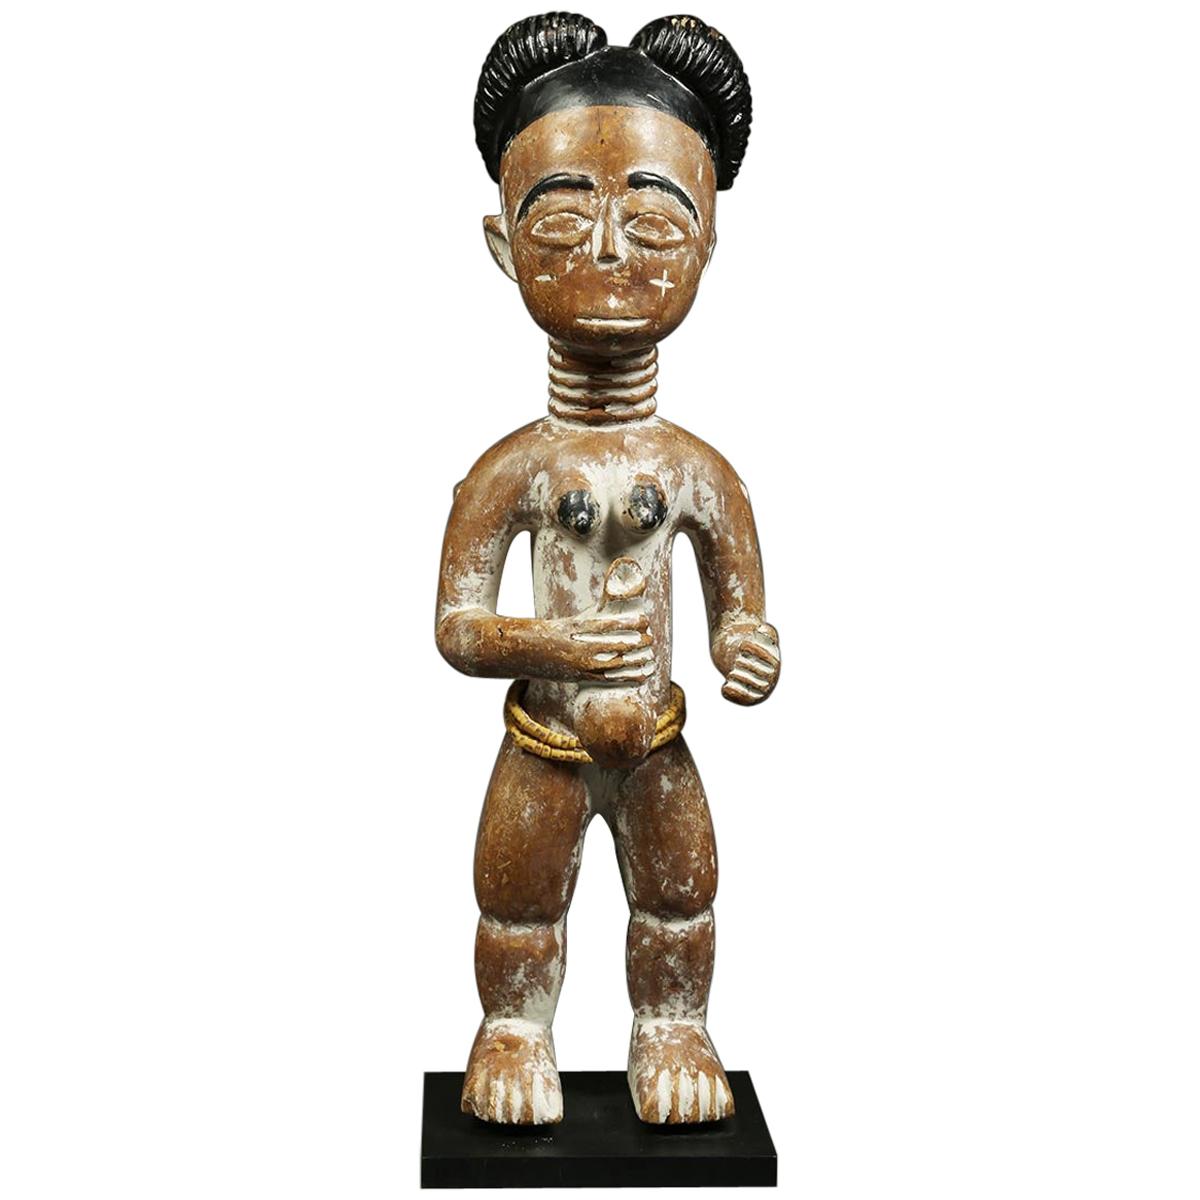 One African Wooden Black Doll Tribal Figure Sculpture Collectible Africa Art 